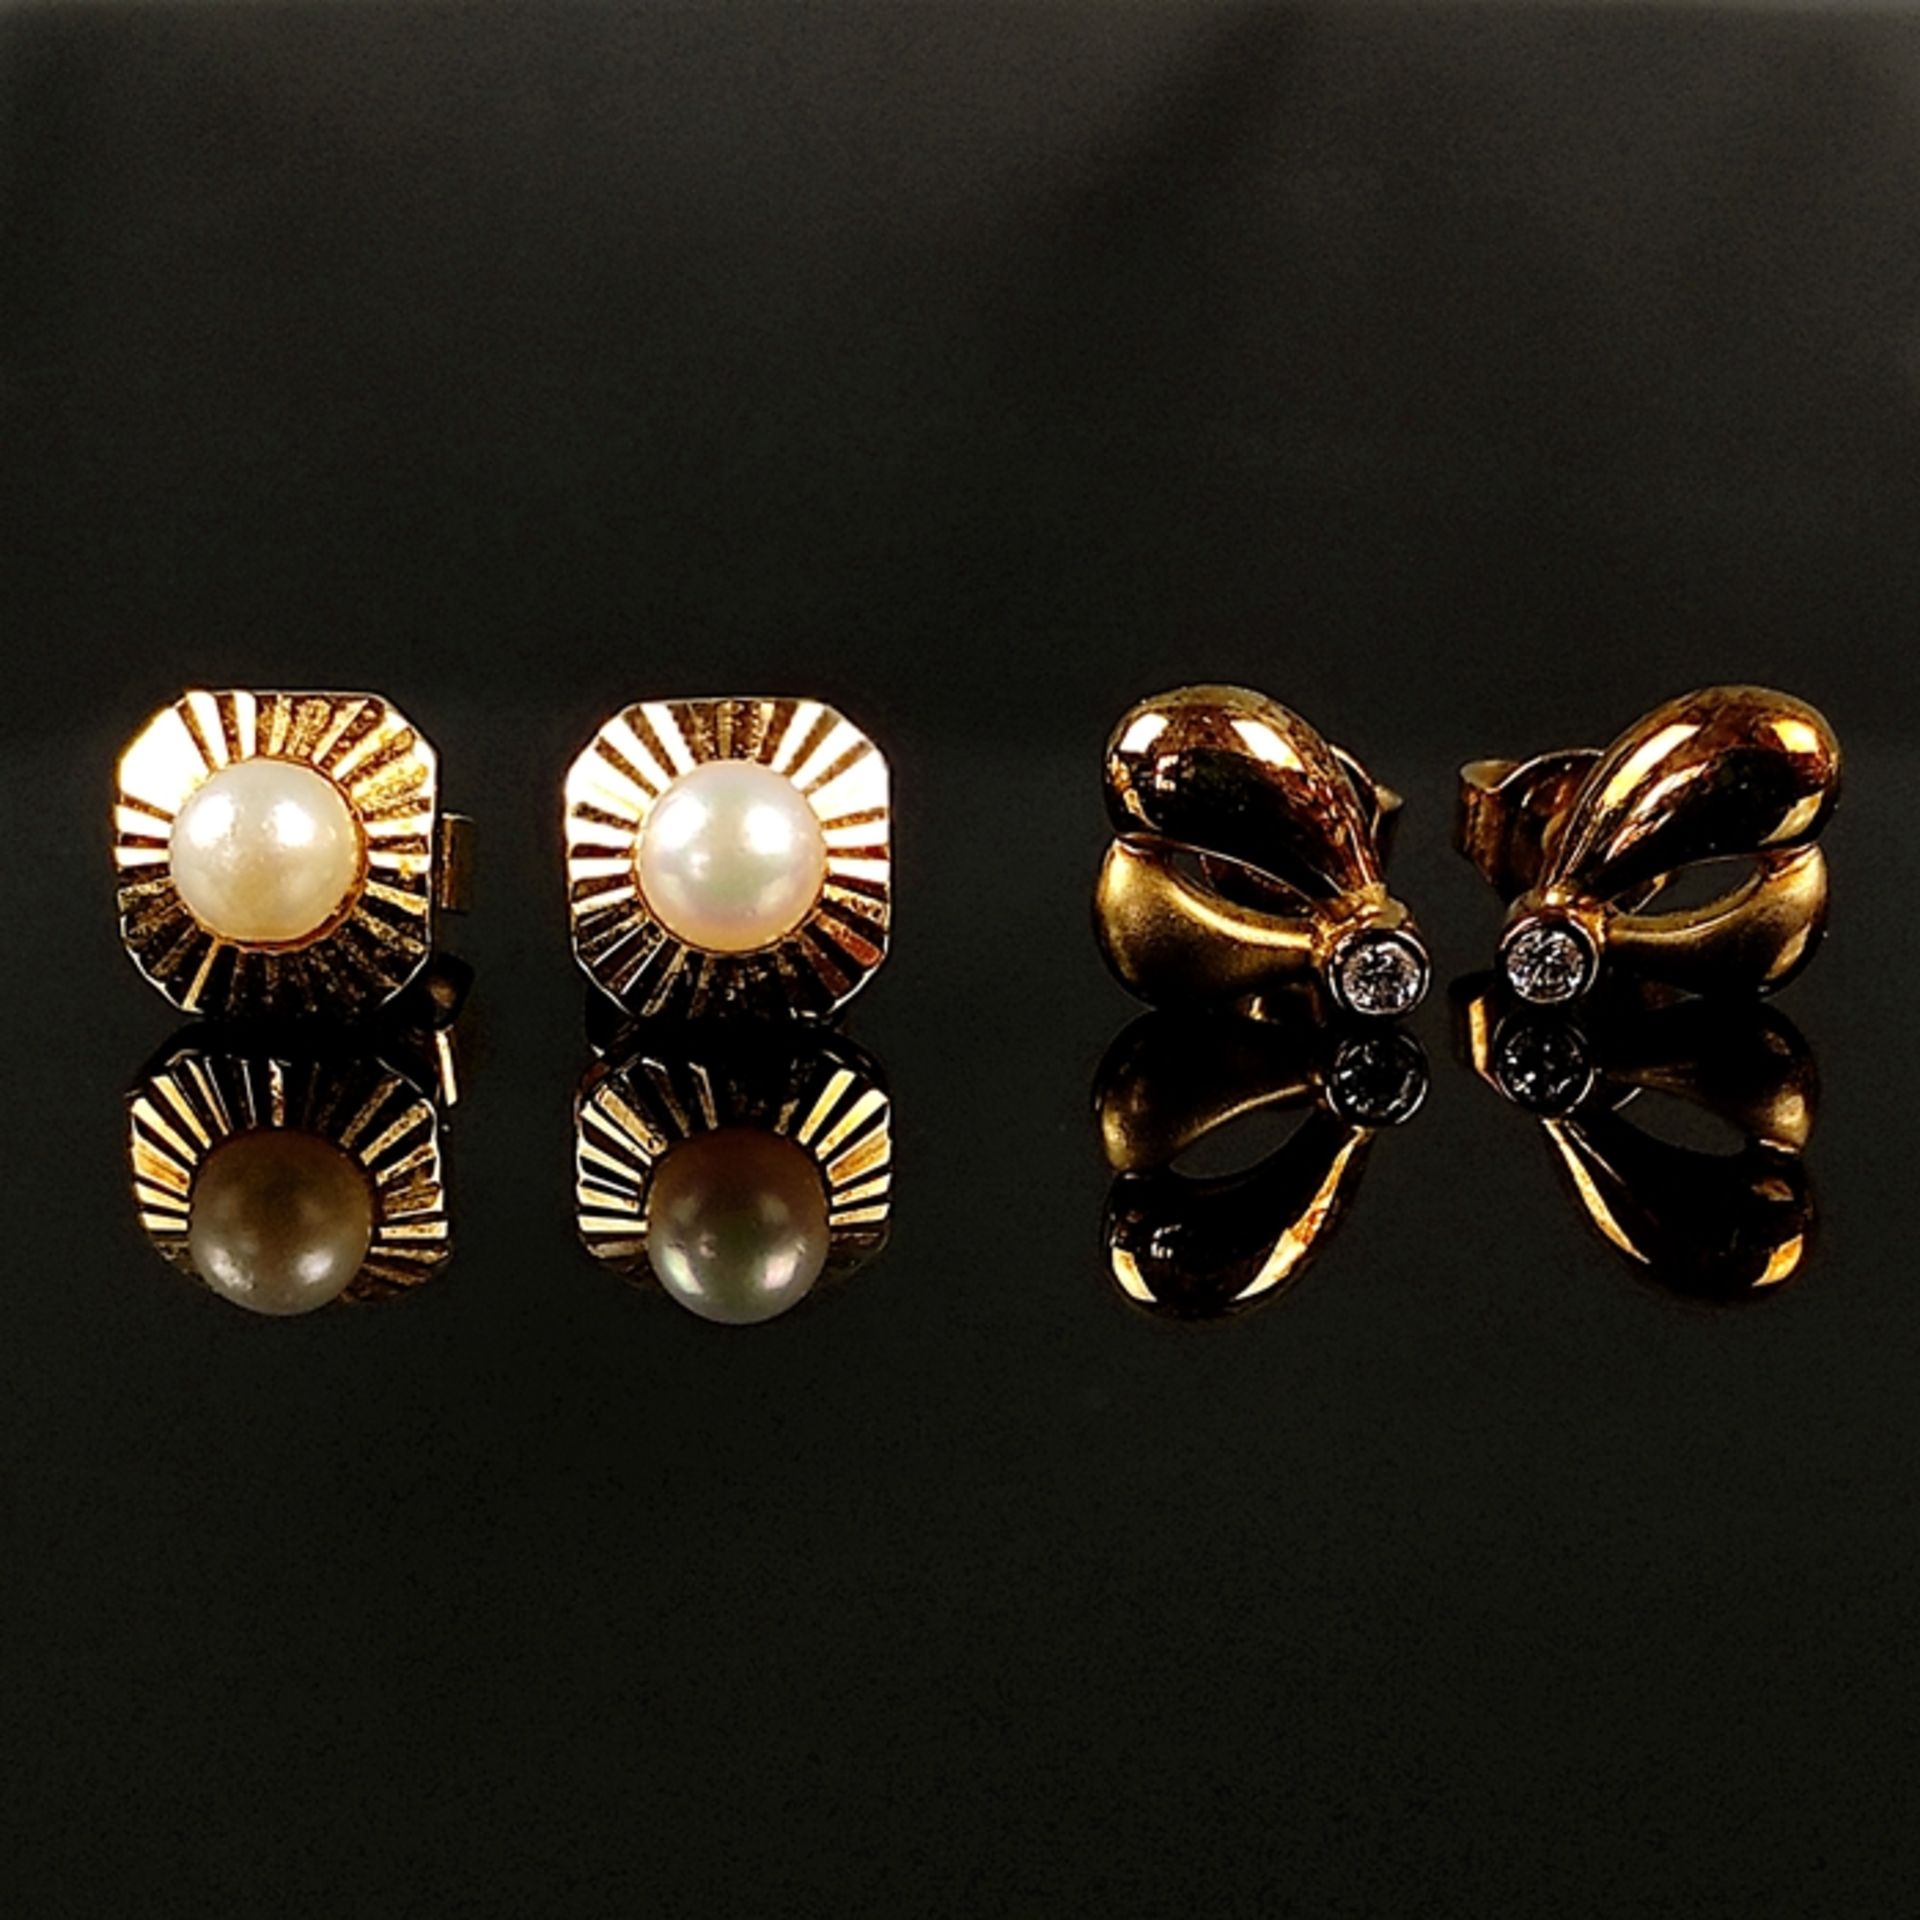 Pair of stud earrings with pearls, 585/14K yellow gold, 2.28g, pearls each of a diameter of approx.